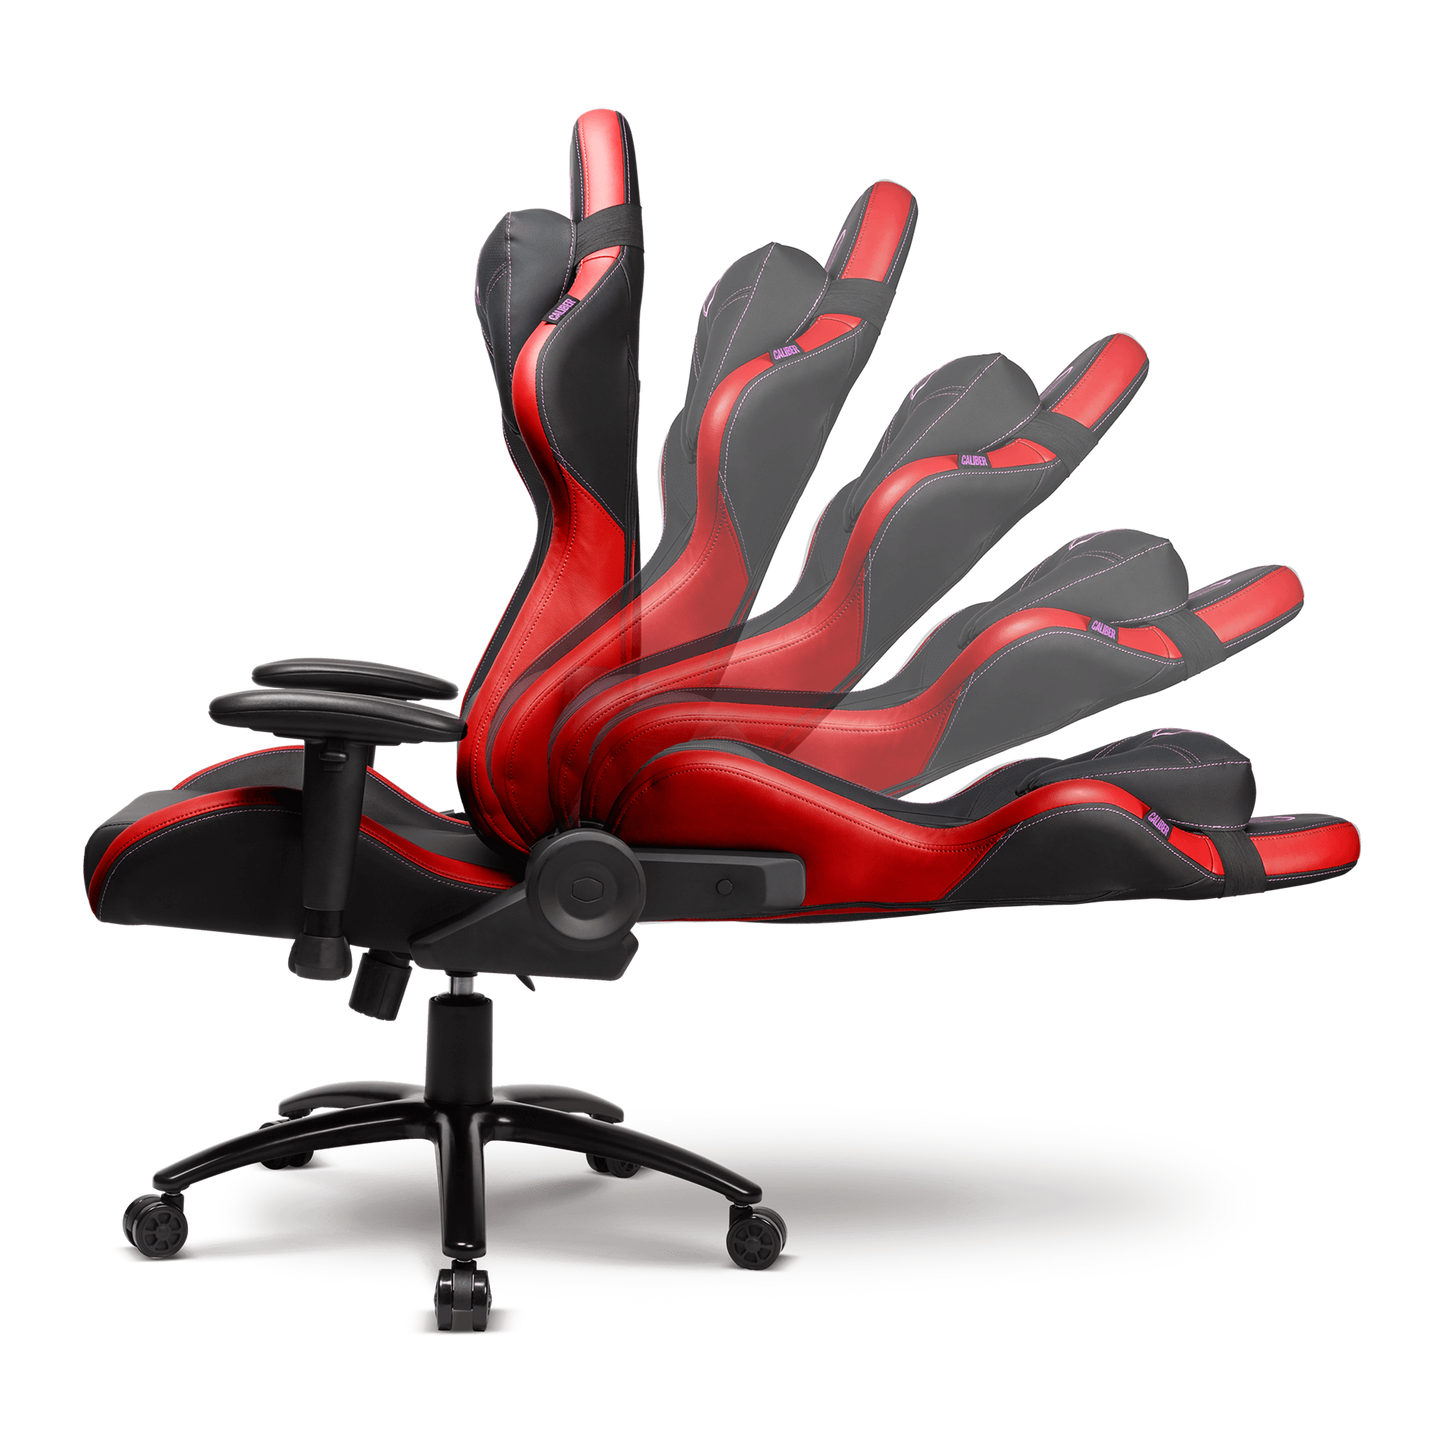 COOLER MASTER CALIBER R2 GAMING CHAIR  BLACK/RED